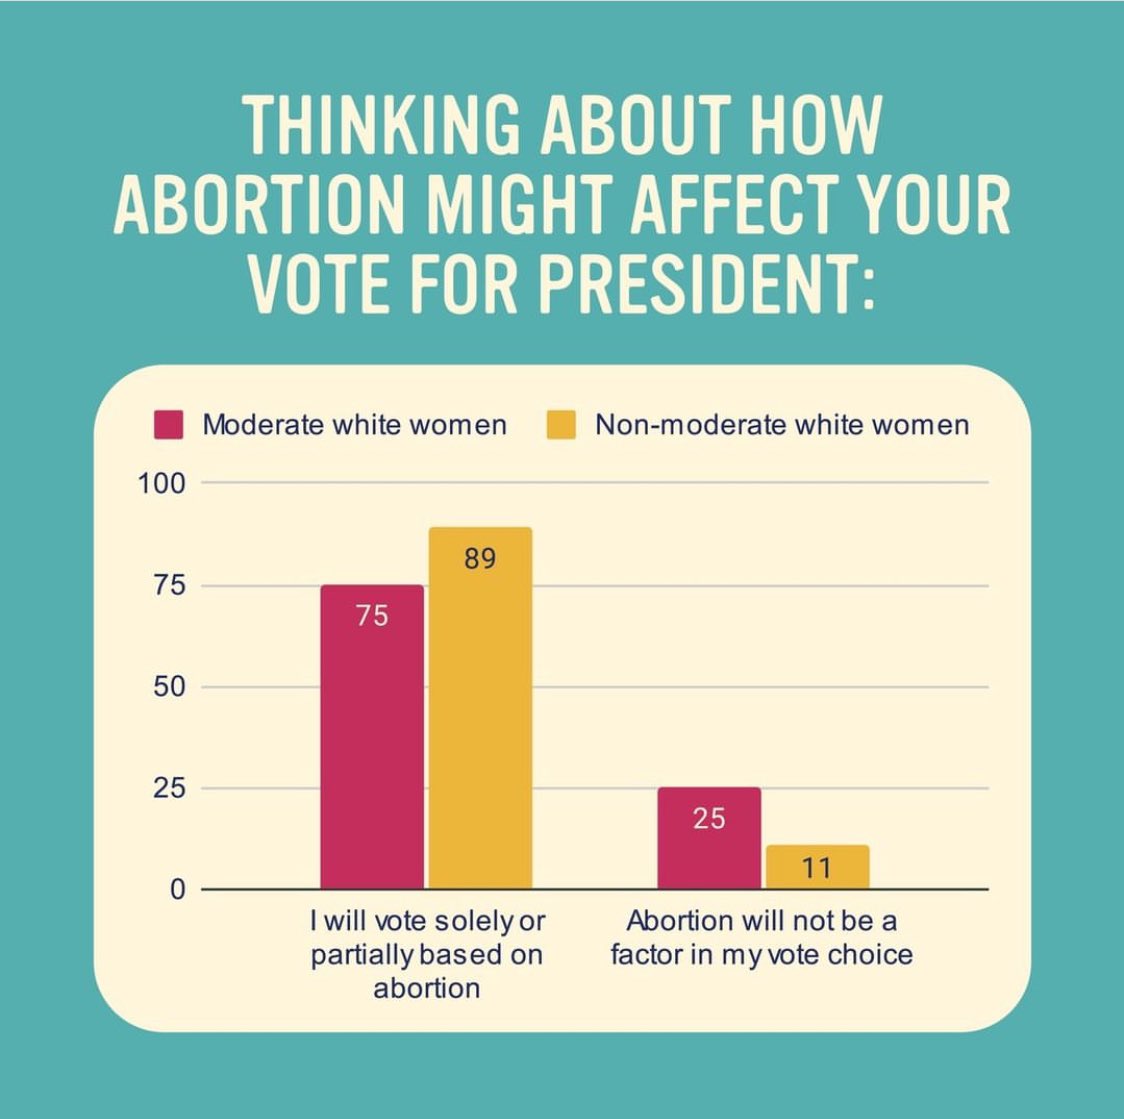 new data point on abortion salience from Galvanize Action - their recent survey found 25 percent of the moderate white women they heard from said abortion rights will not factor into their vote choice this year